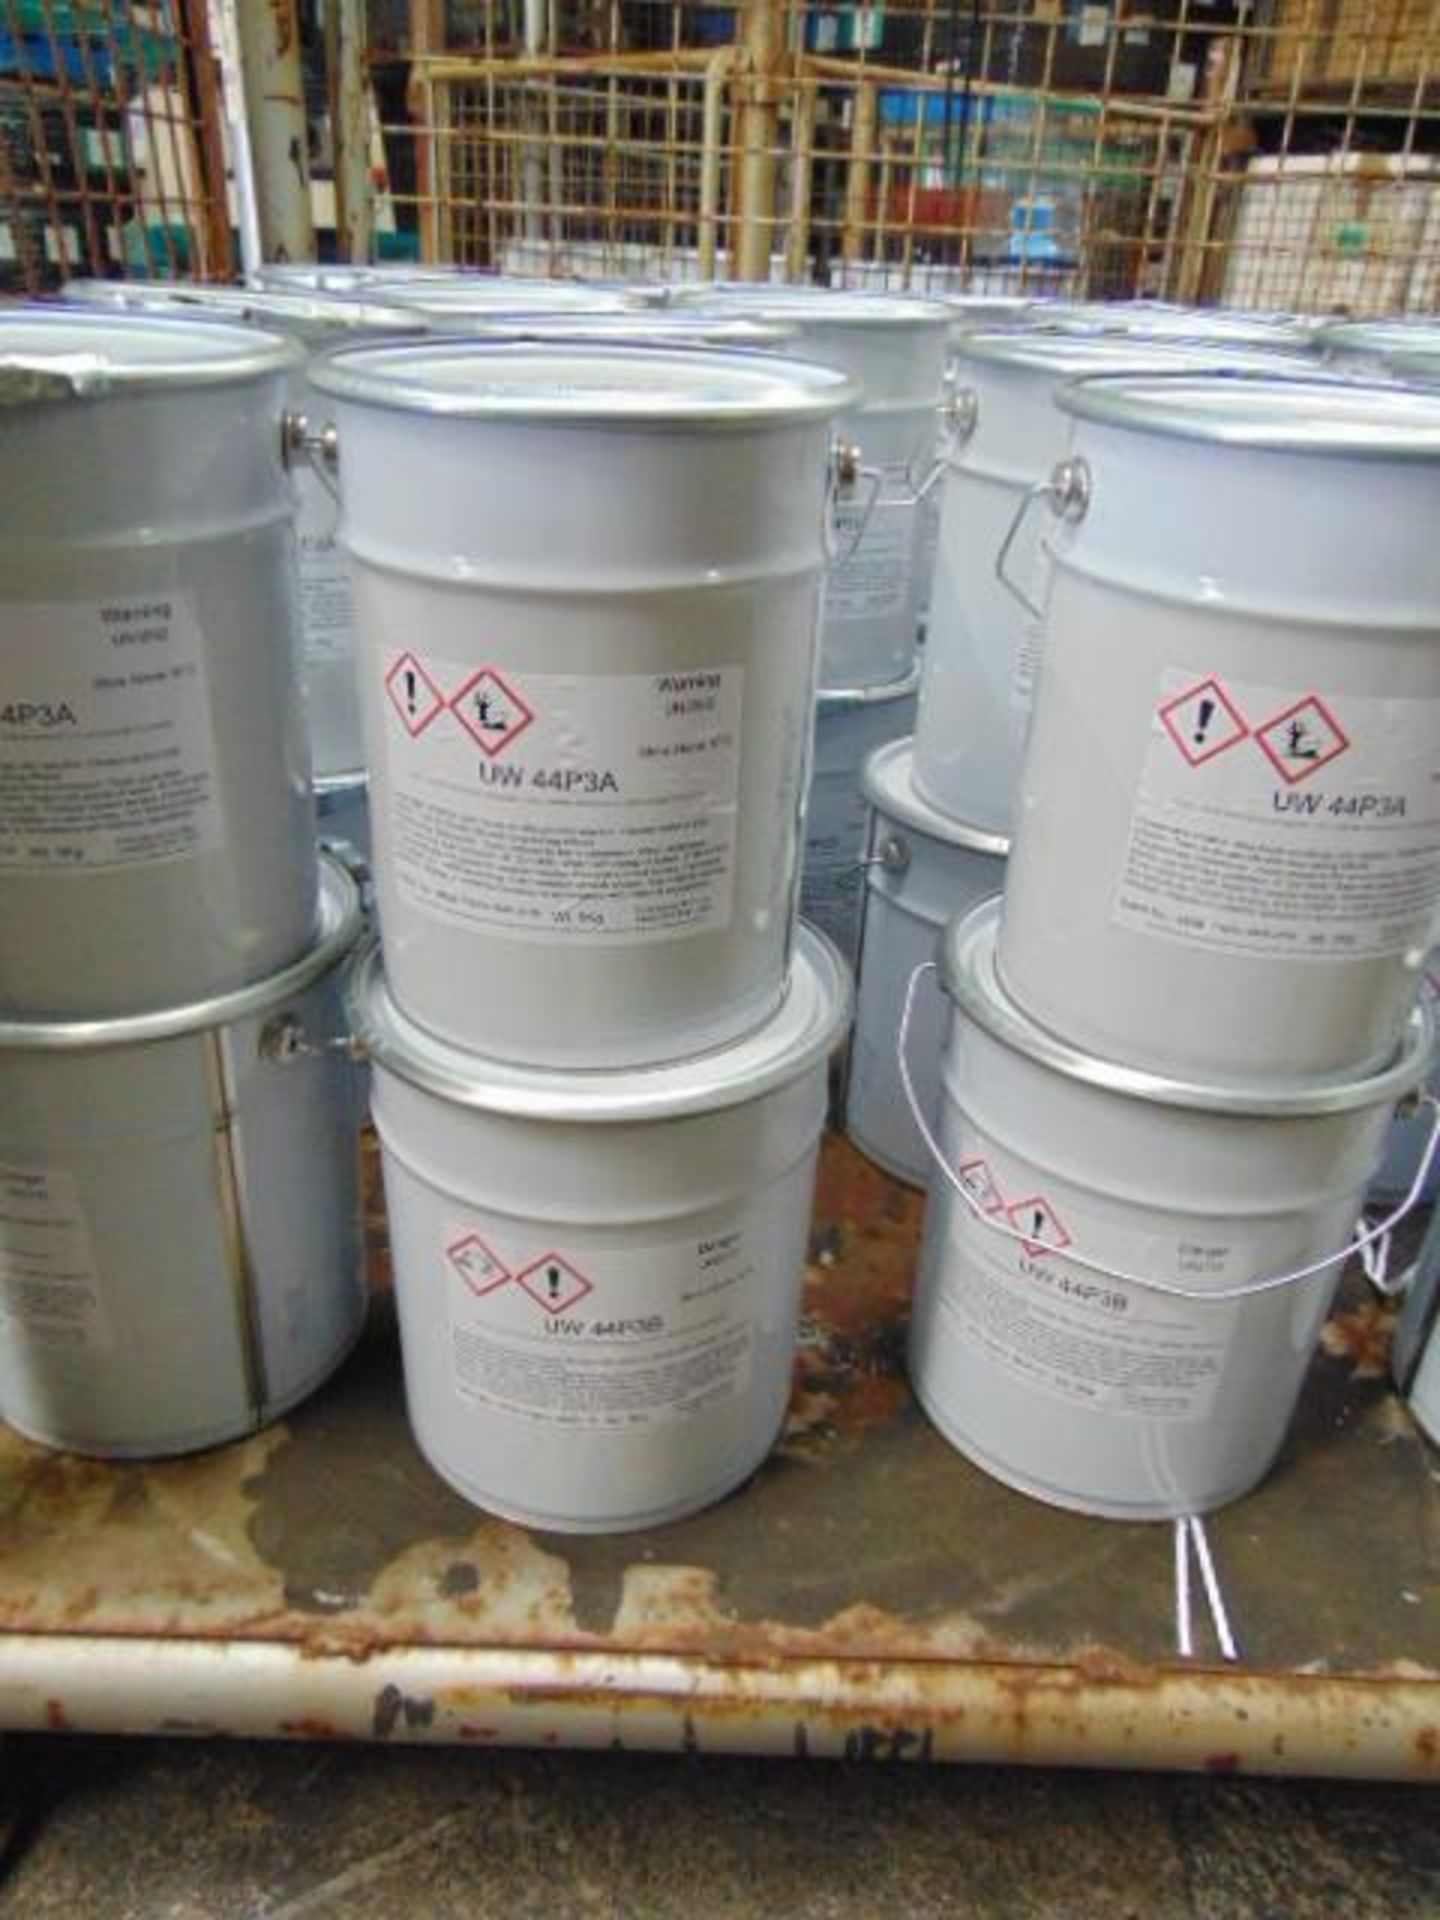 12 x Wessex Resins 2 Part Adhesive - Image 2 of 4